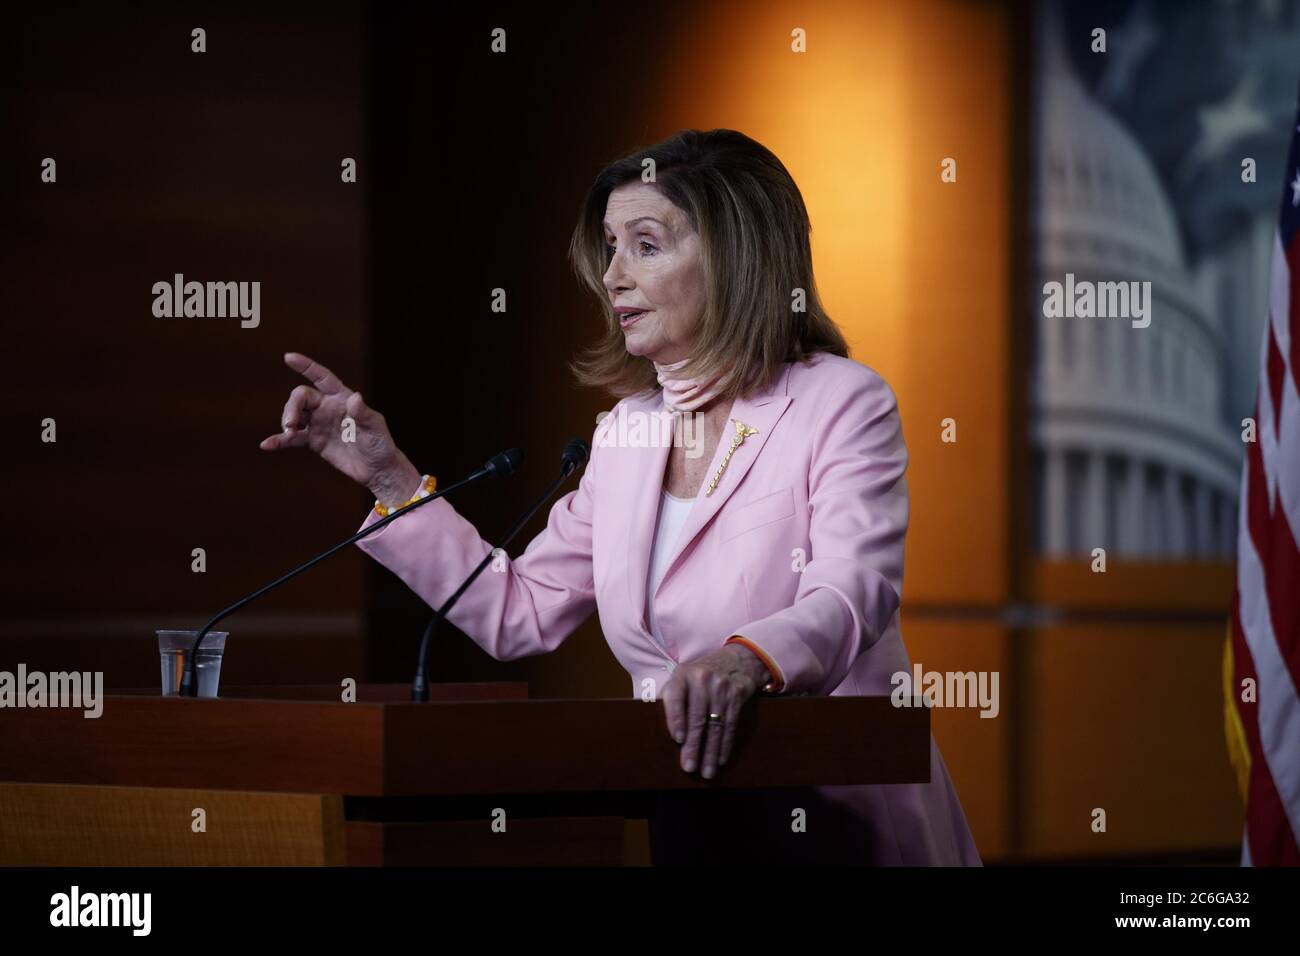 Washington, USA. 9th July, 2020. U.S. House Speaker Nancy Pelosi speaks during her weekly press conference on Capitol Hill in Washington, DC, the United States, on July 9, 2020. U.S. President Donald Trump's official withdrawal of the country from the World Health Organization (WHO) is 'an act of true senselessness,' U.S. House Speaker Nancy Pelosi said on Twitter. Credit: Ting Shen/Xinhua/Alamy Live News Stock Photo